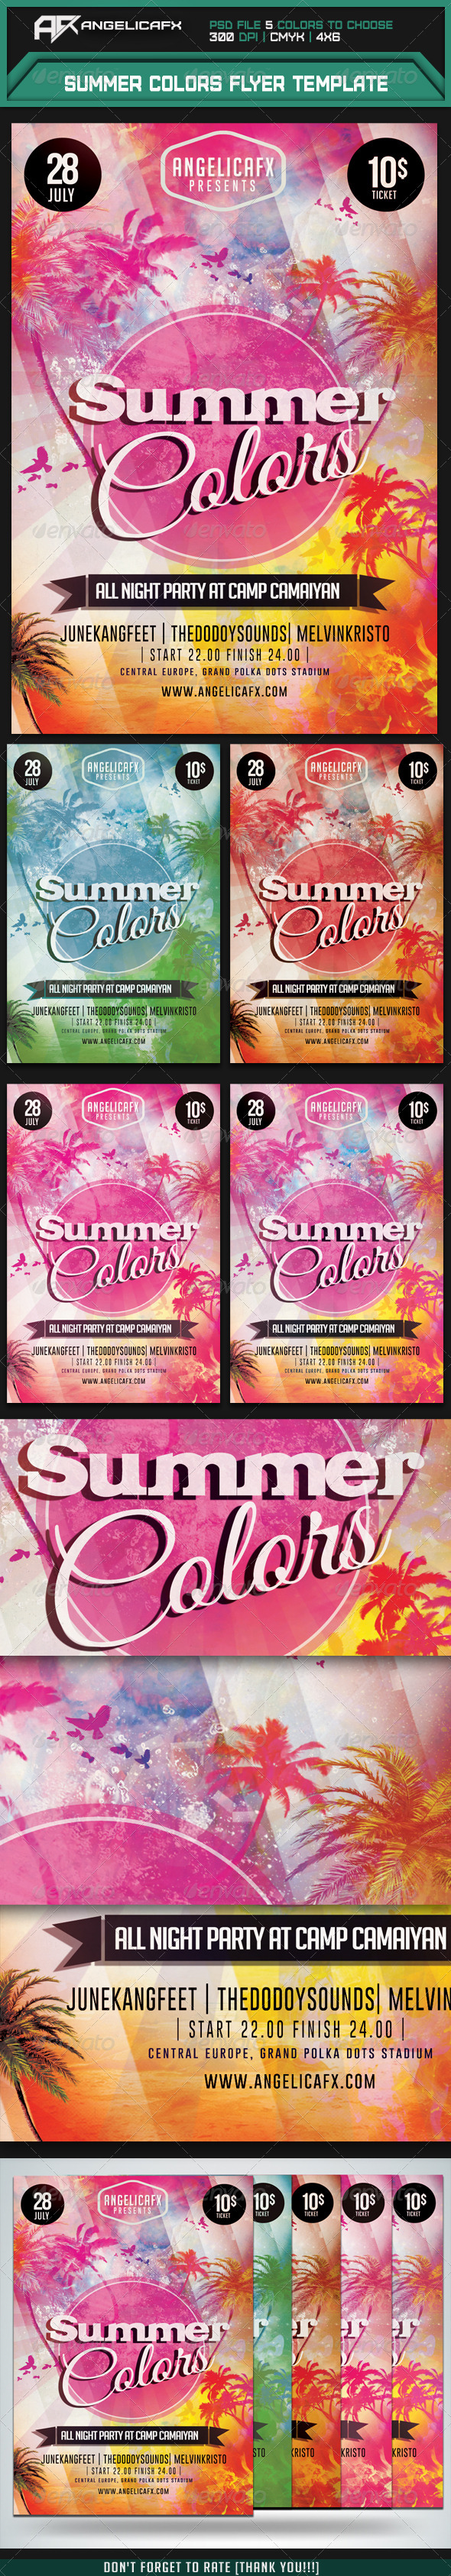 Summer Colors Flyer Template